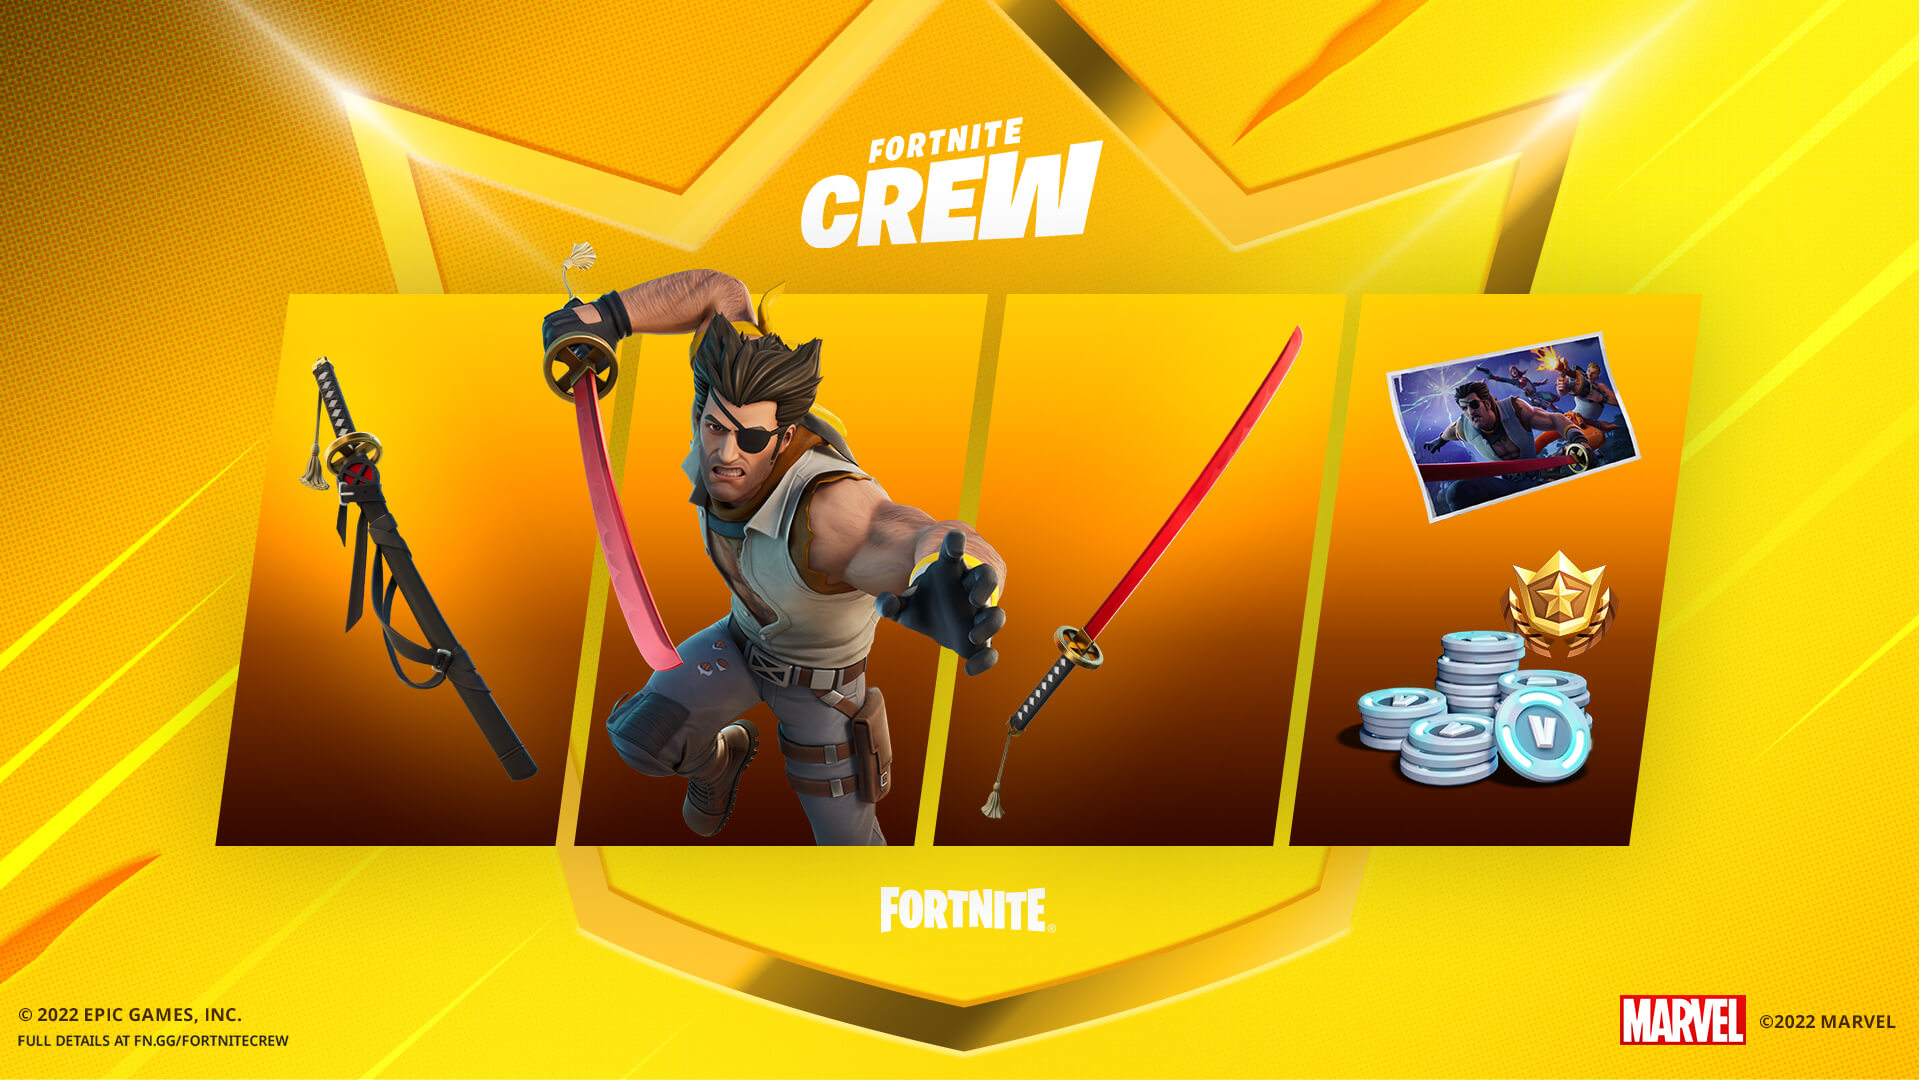 How To Get The Fortnite Wolverine Zero Skin Fortnite August 2022 Crew